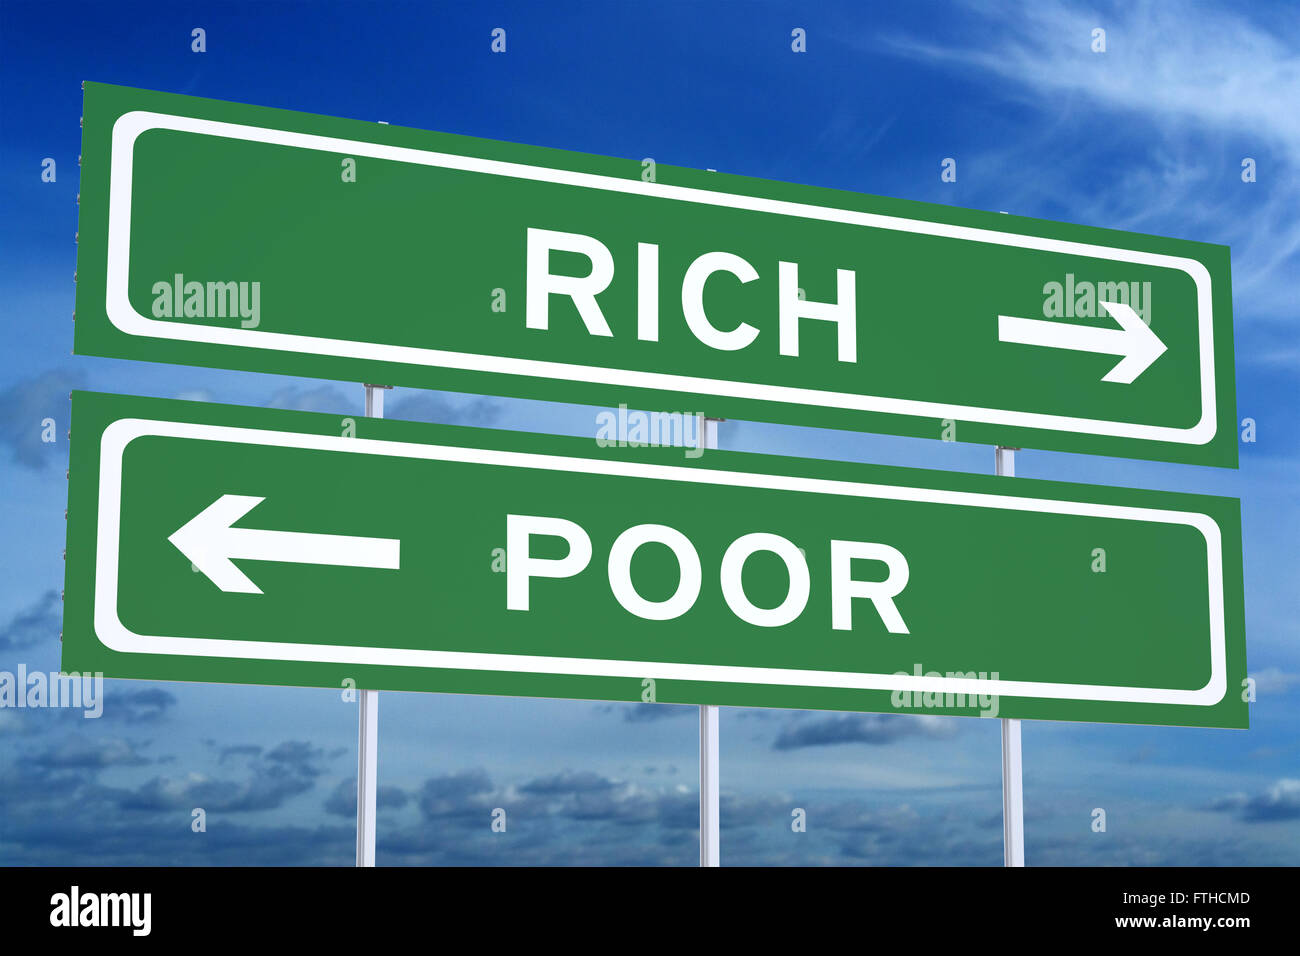 Poor or Rich concept on the road signpost, 3D rendering Stock Photo